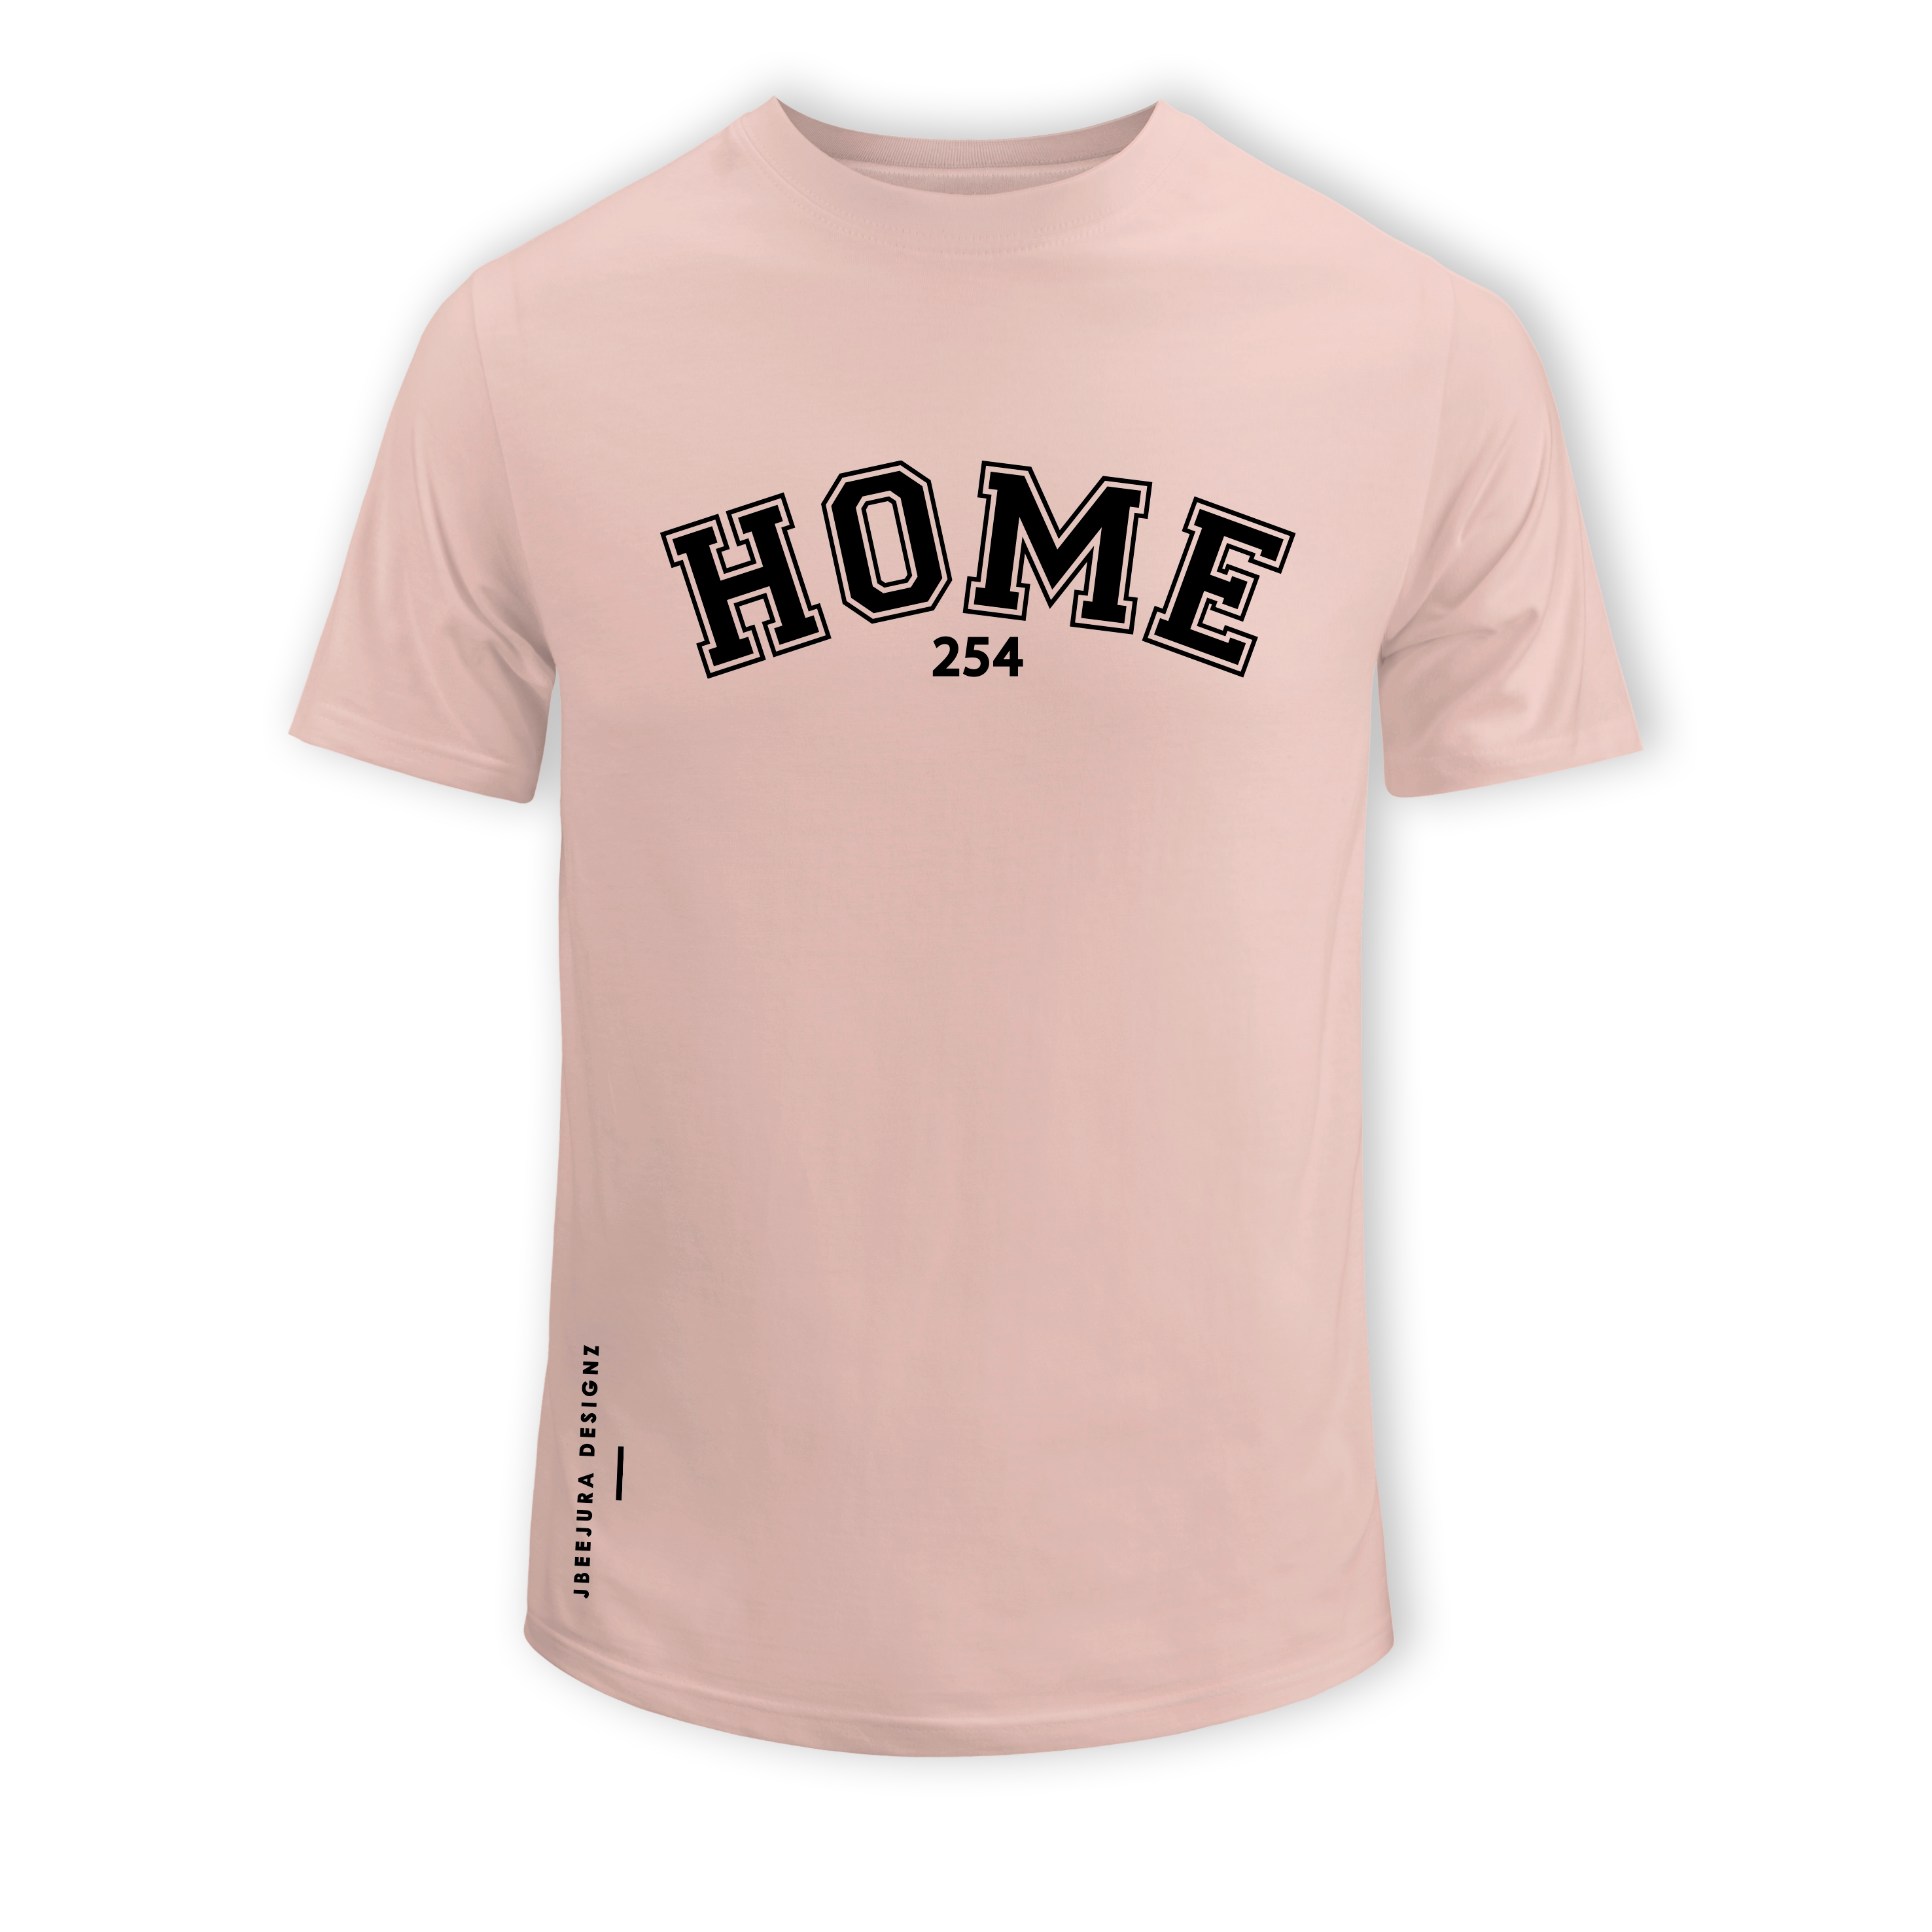 home_254 SHORT-SLEEVED PEACH T-SHIRT WITH A BLACK COLLEGE PRINT – COTTON PLUS FABRIC